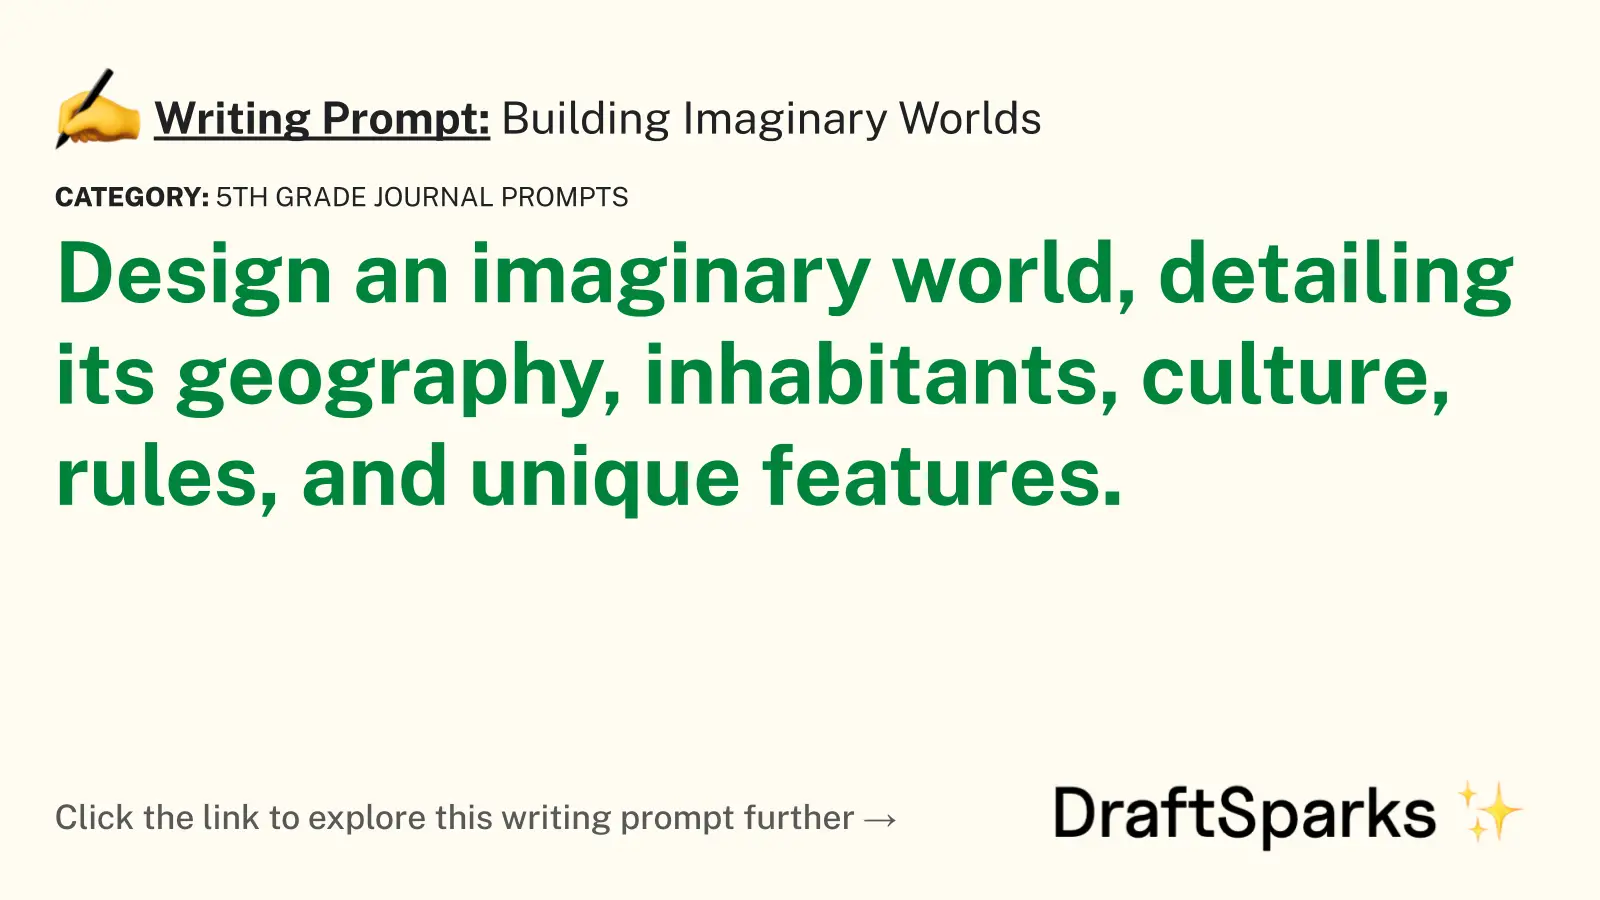 Building Imaginary Worlds